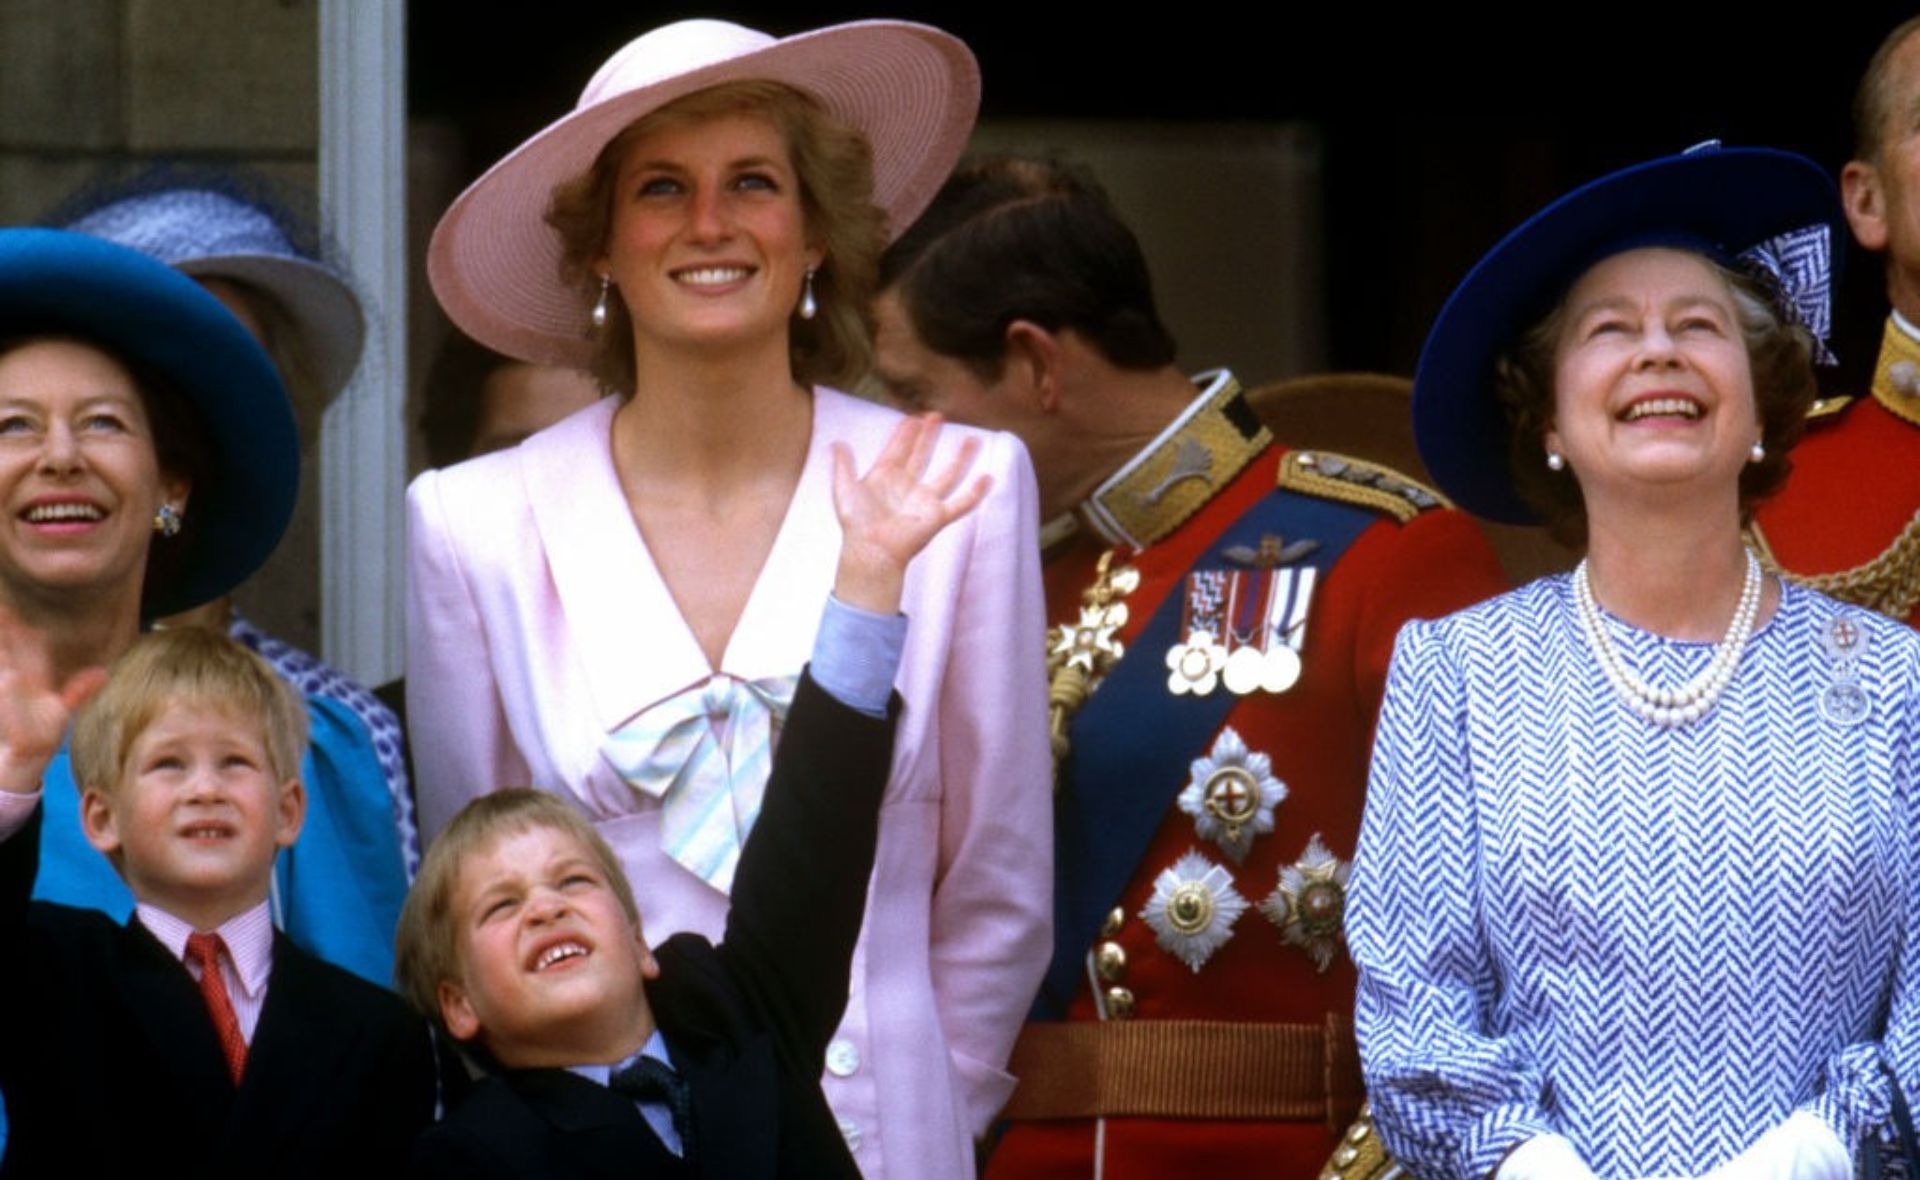 HISTORY MAKING: Rare items from British royal family to be auctioned